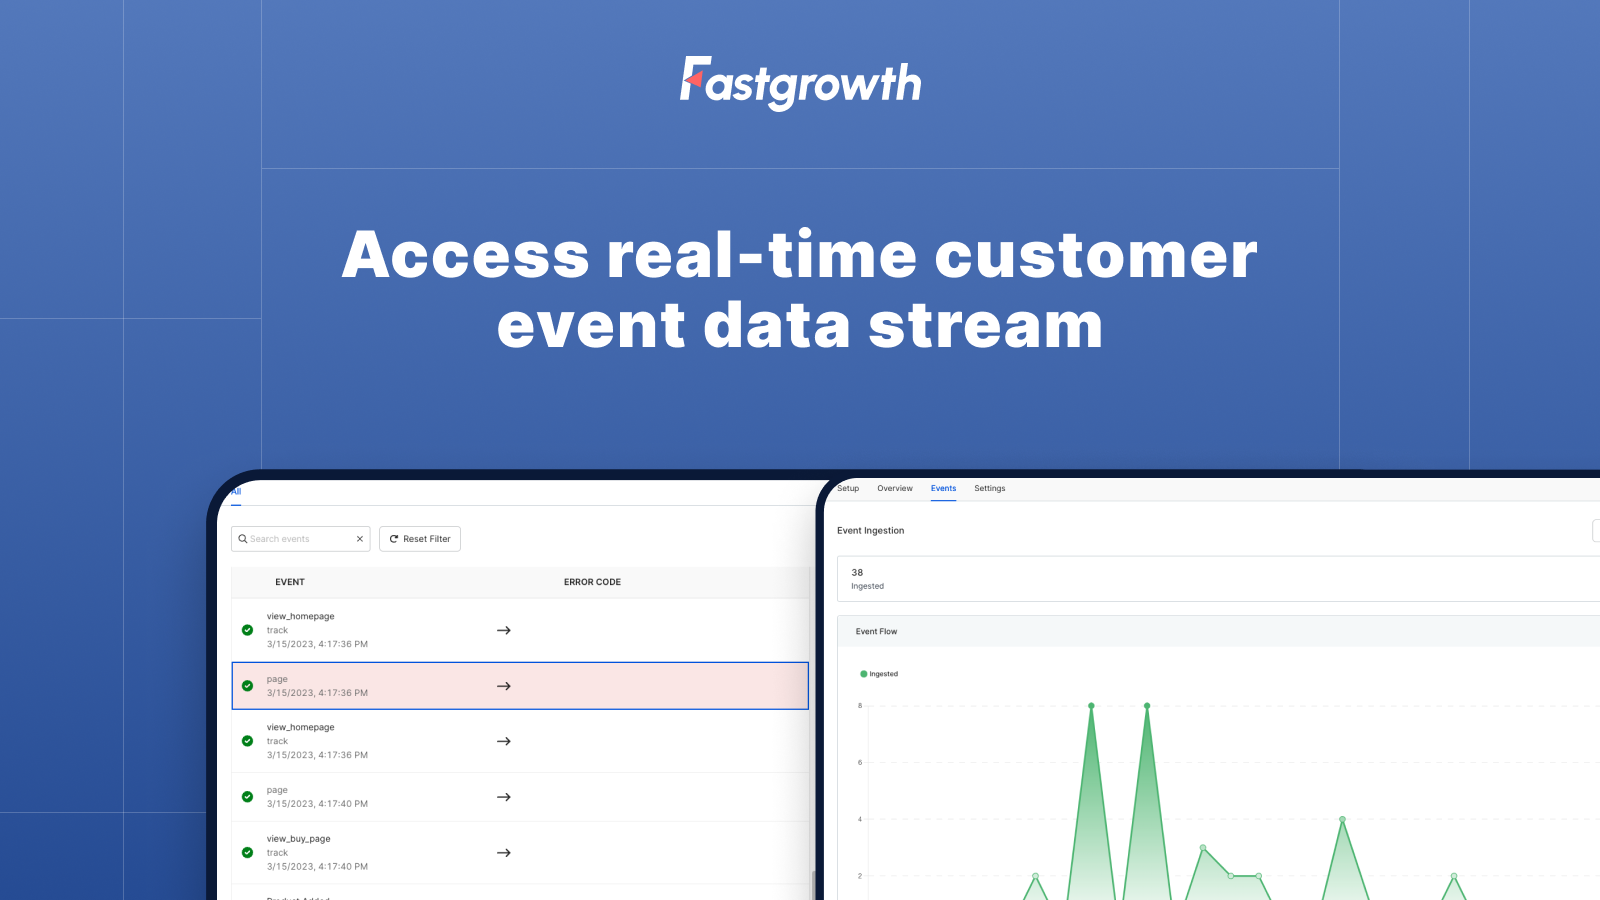 Access real-time customer event data stream